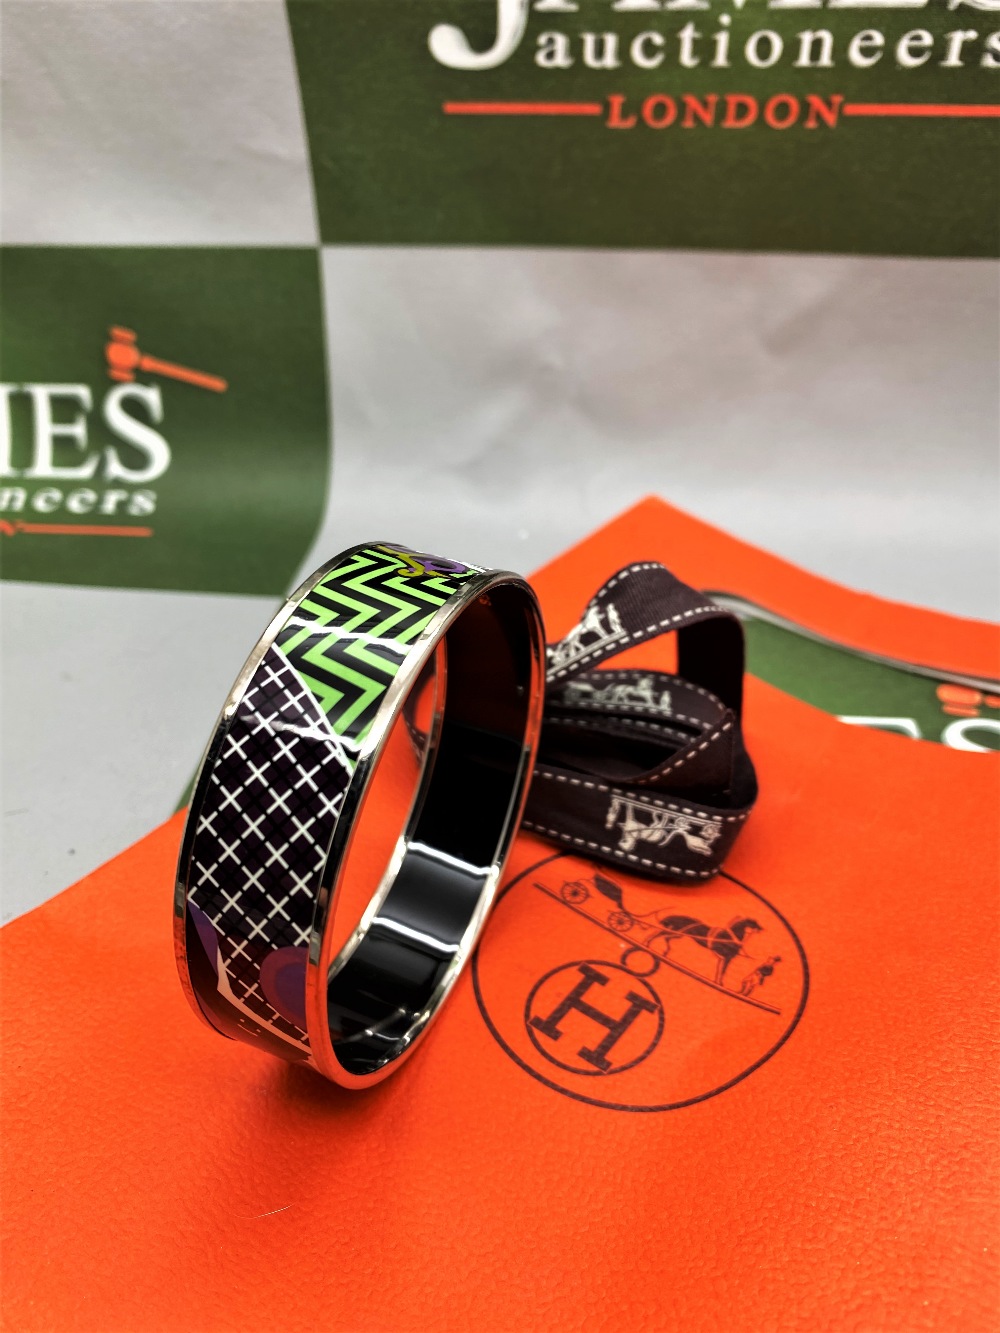 Hermes "Horses" Wide Late Edition Monogram & Silver Bangle - Image 5 of 7